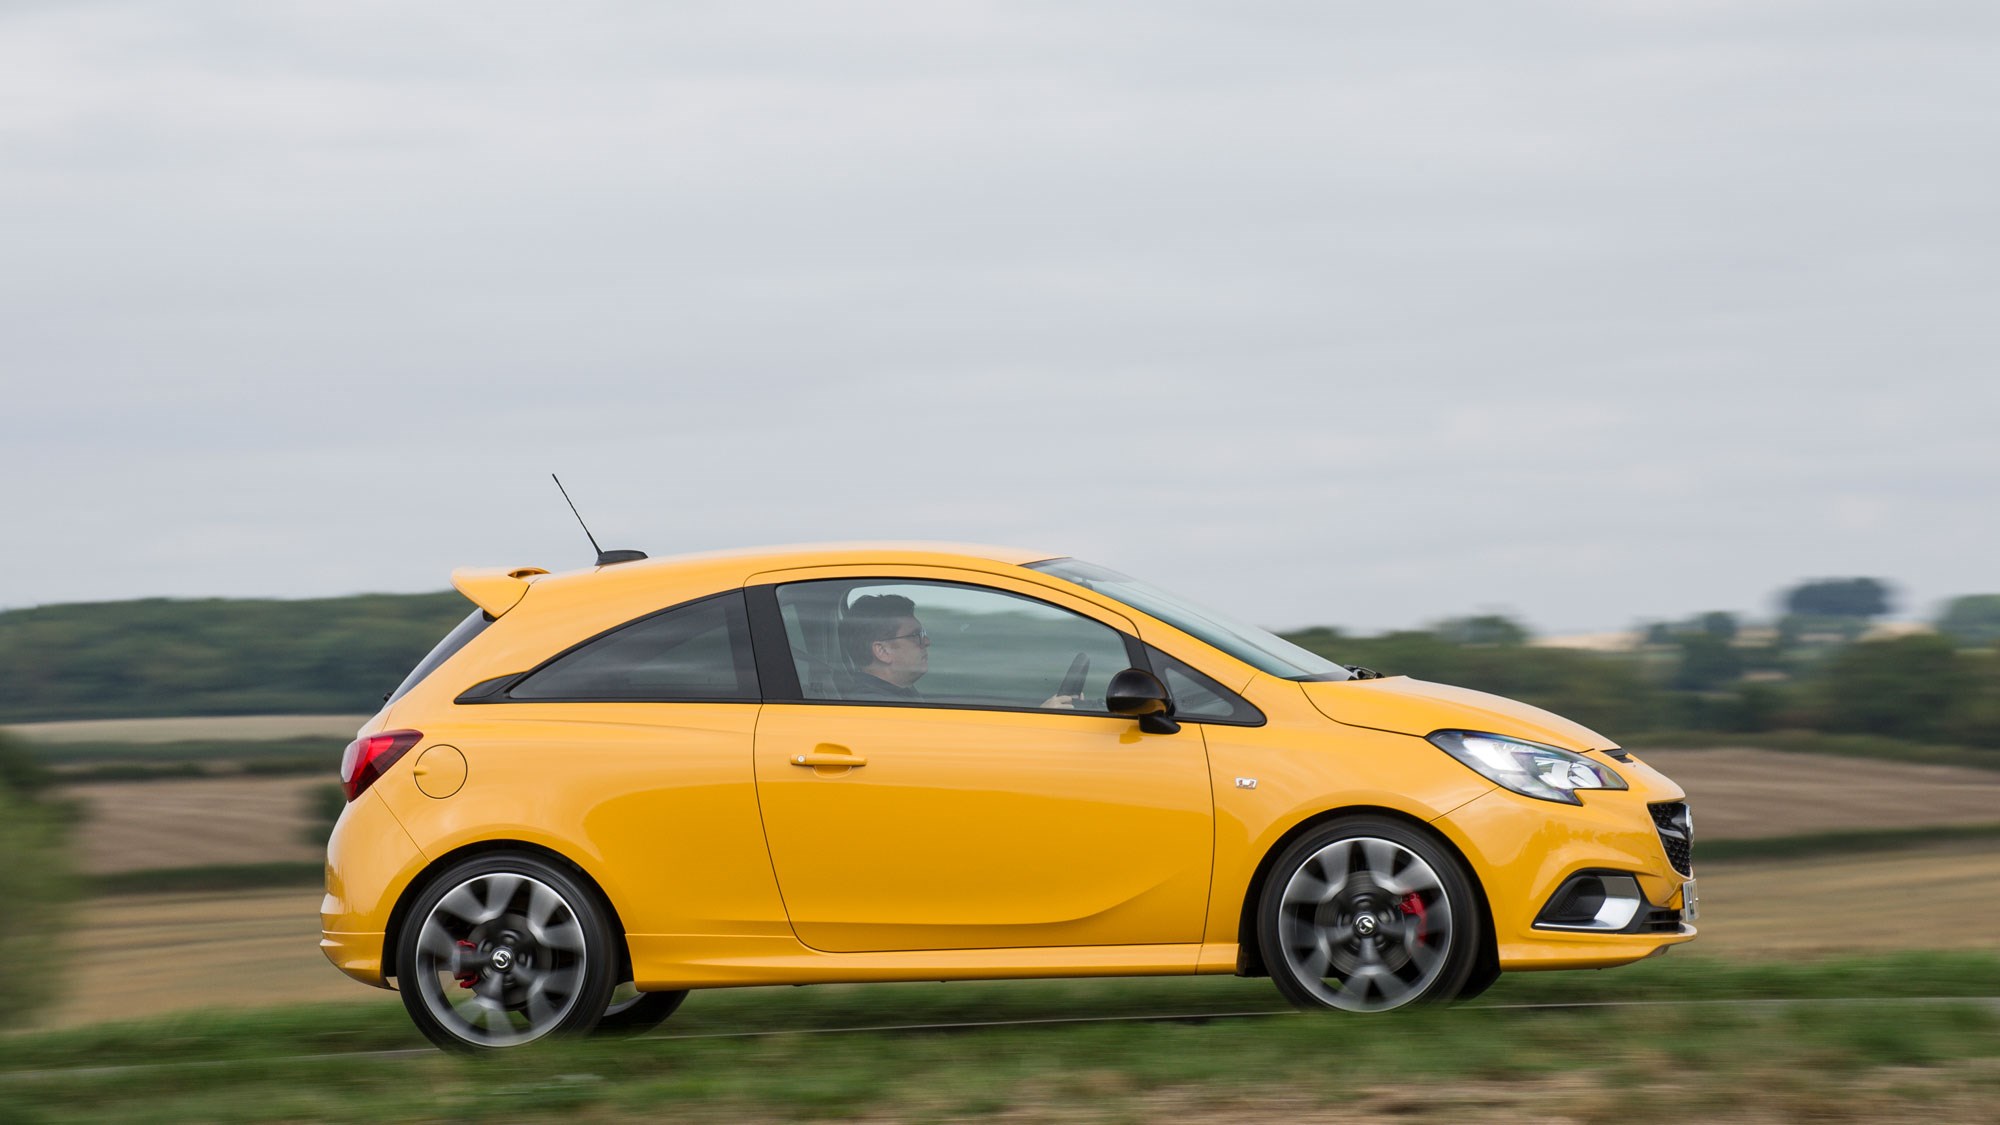 Vauxhall Corsa GSI (2018) review: outclassed and outgunned